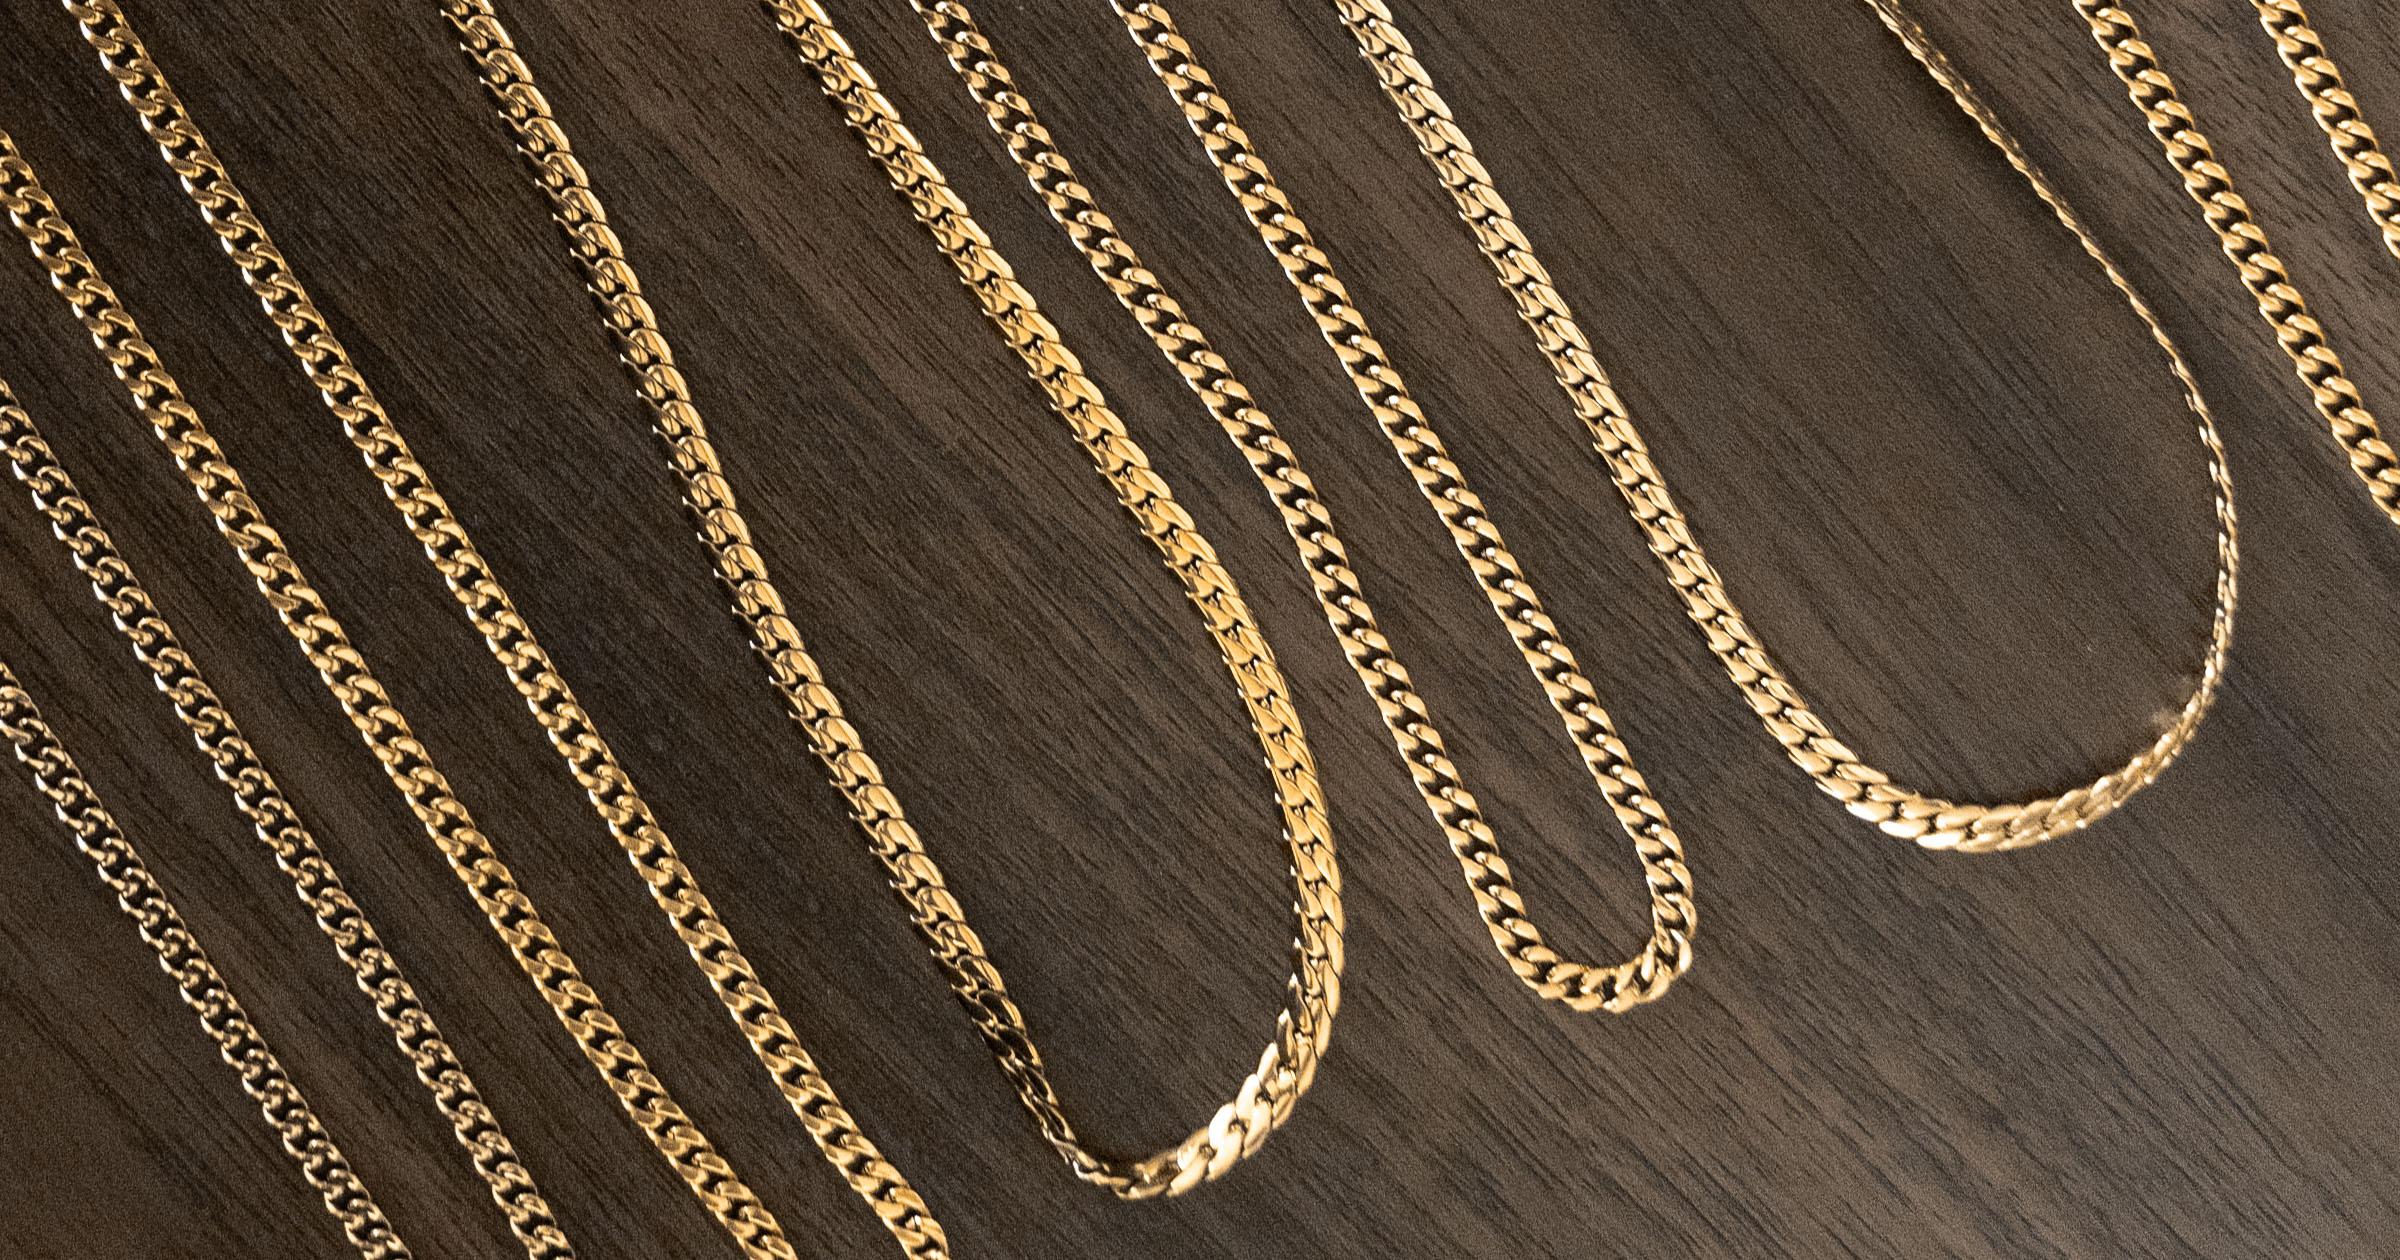 closeup of various solid and hollow gold chains laid out on a wood table